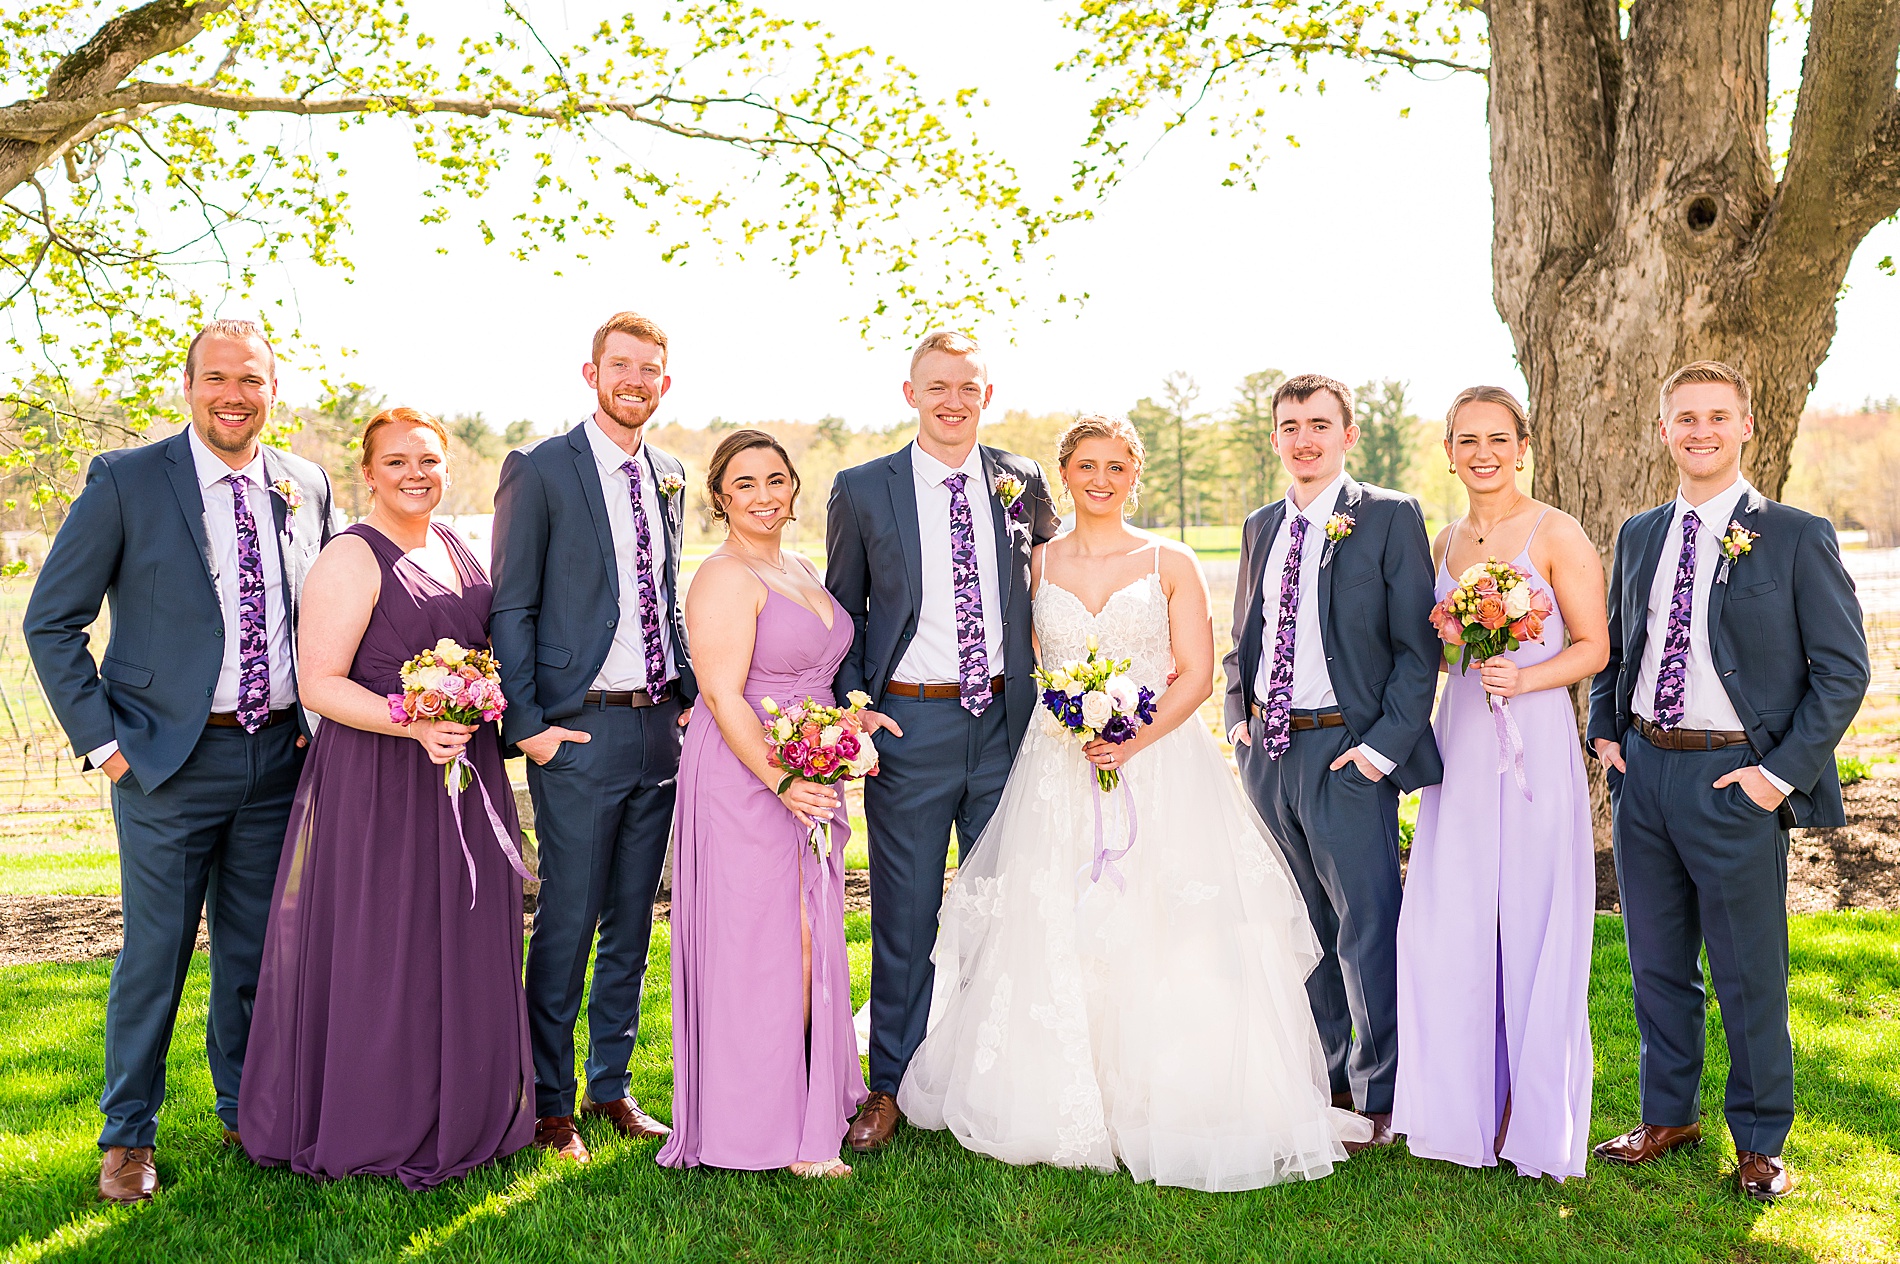 wedding party portraits after outdoor wedding ceremony 